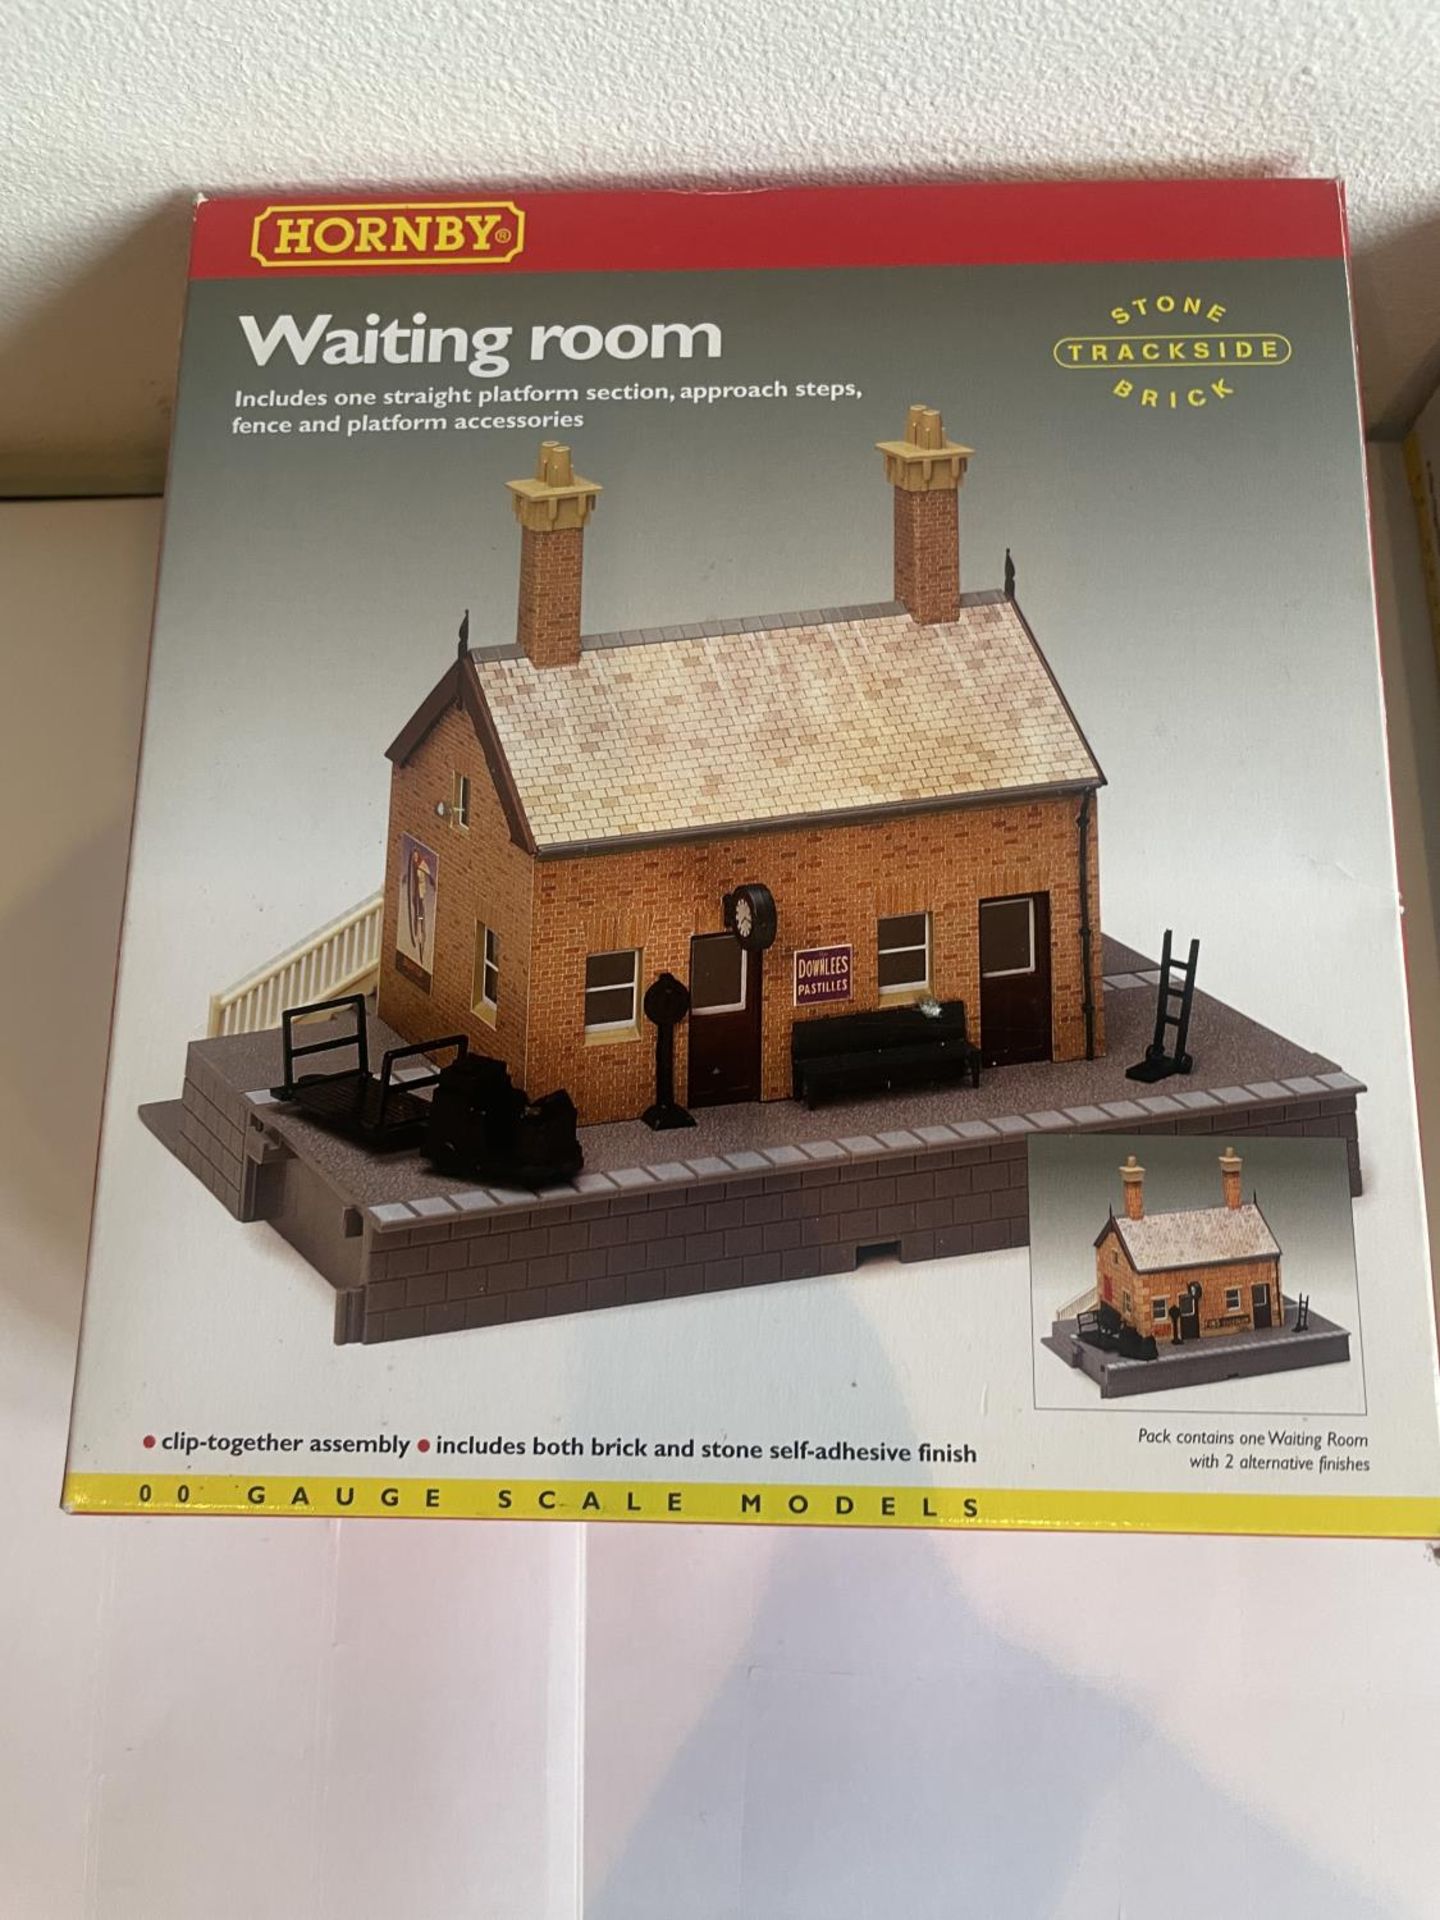 TWO AS NEW AND BOXED HORNBY 00 GAUGE RAILWAY MODELS TO INCLUDE A BOOKING HALLA AND A WAITING ROOM - Image 2 of 3